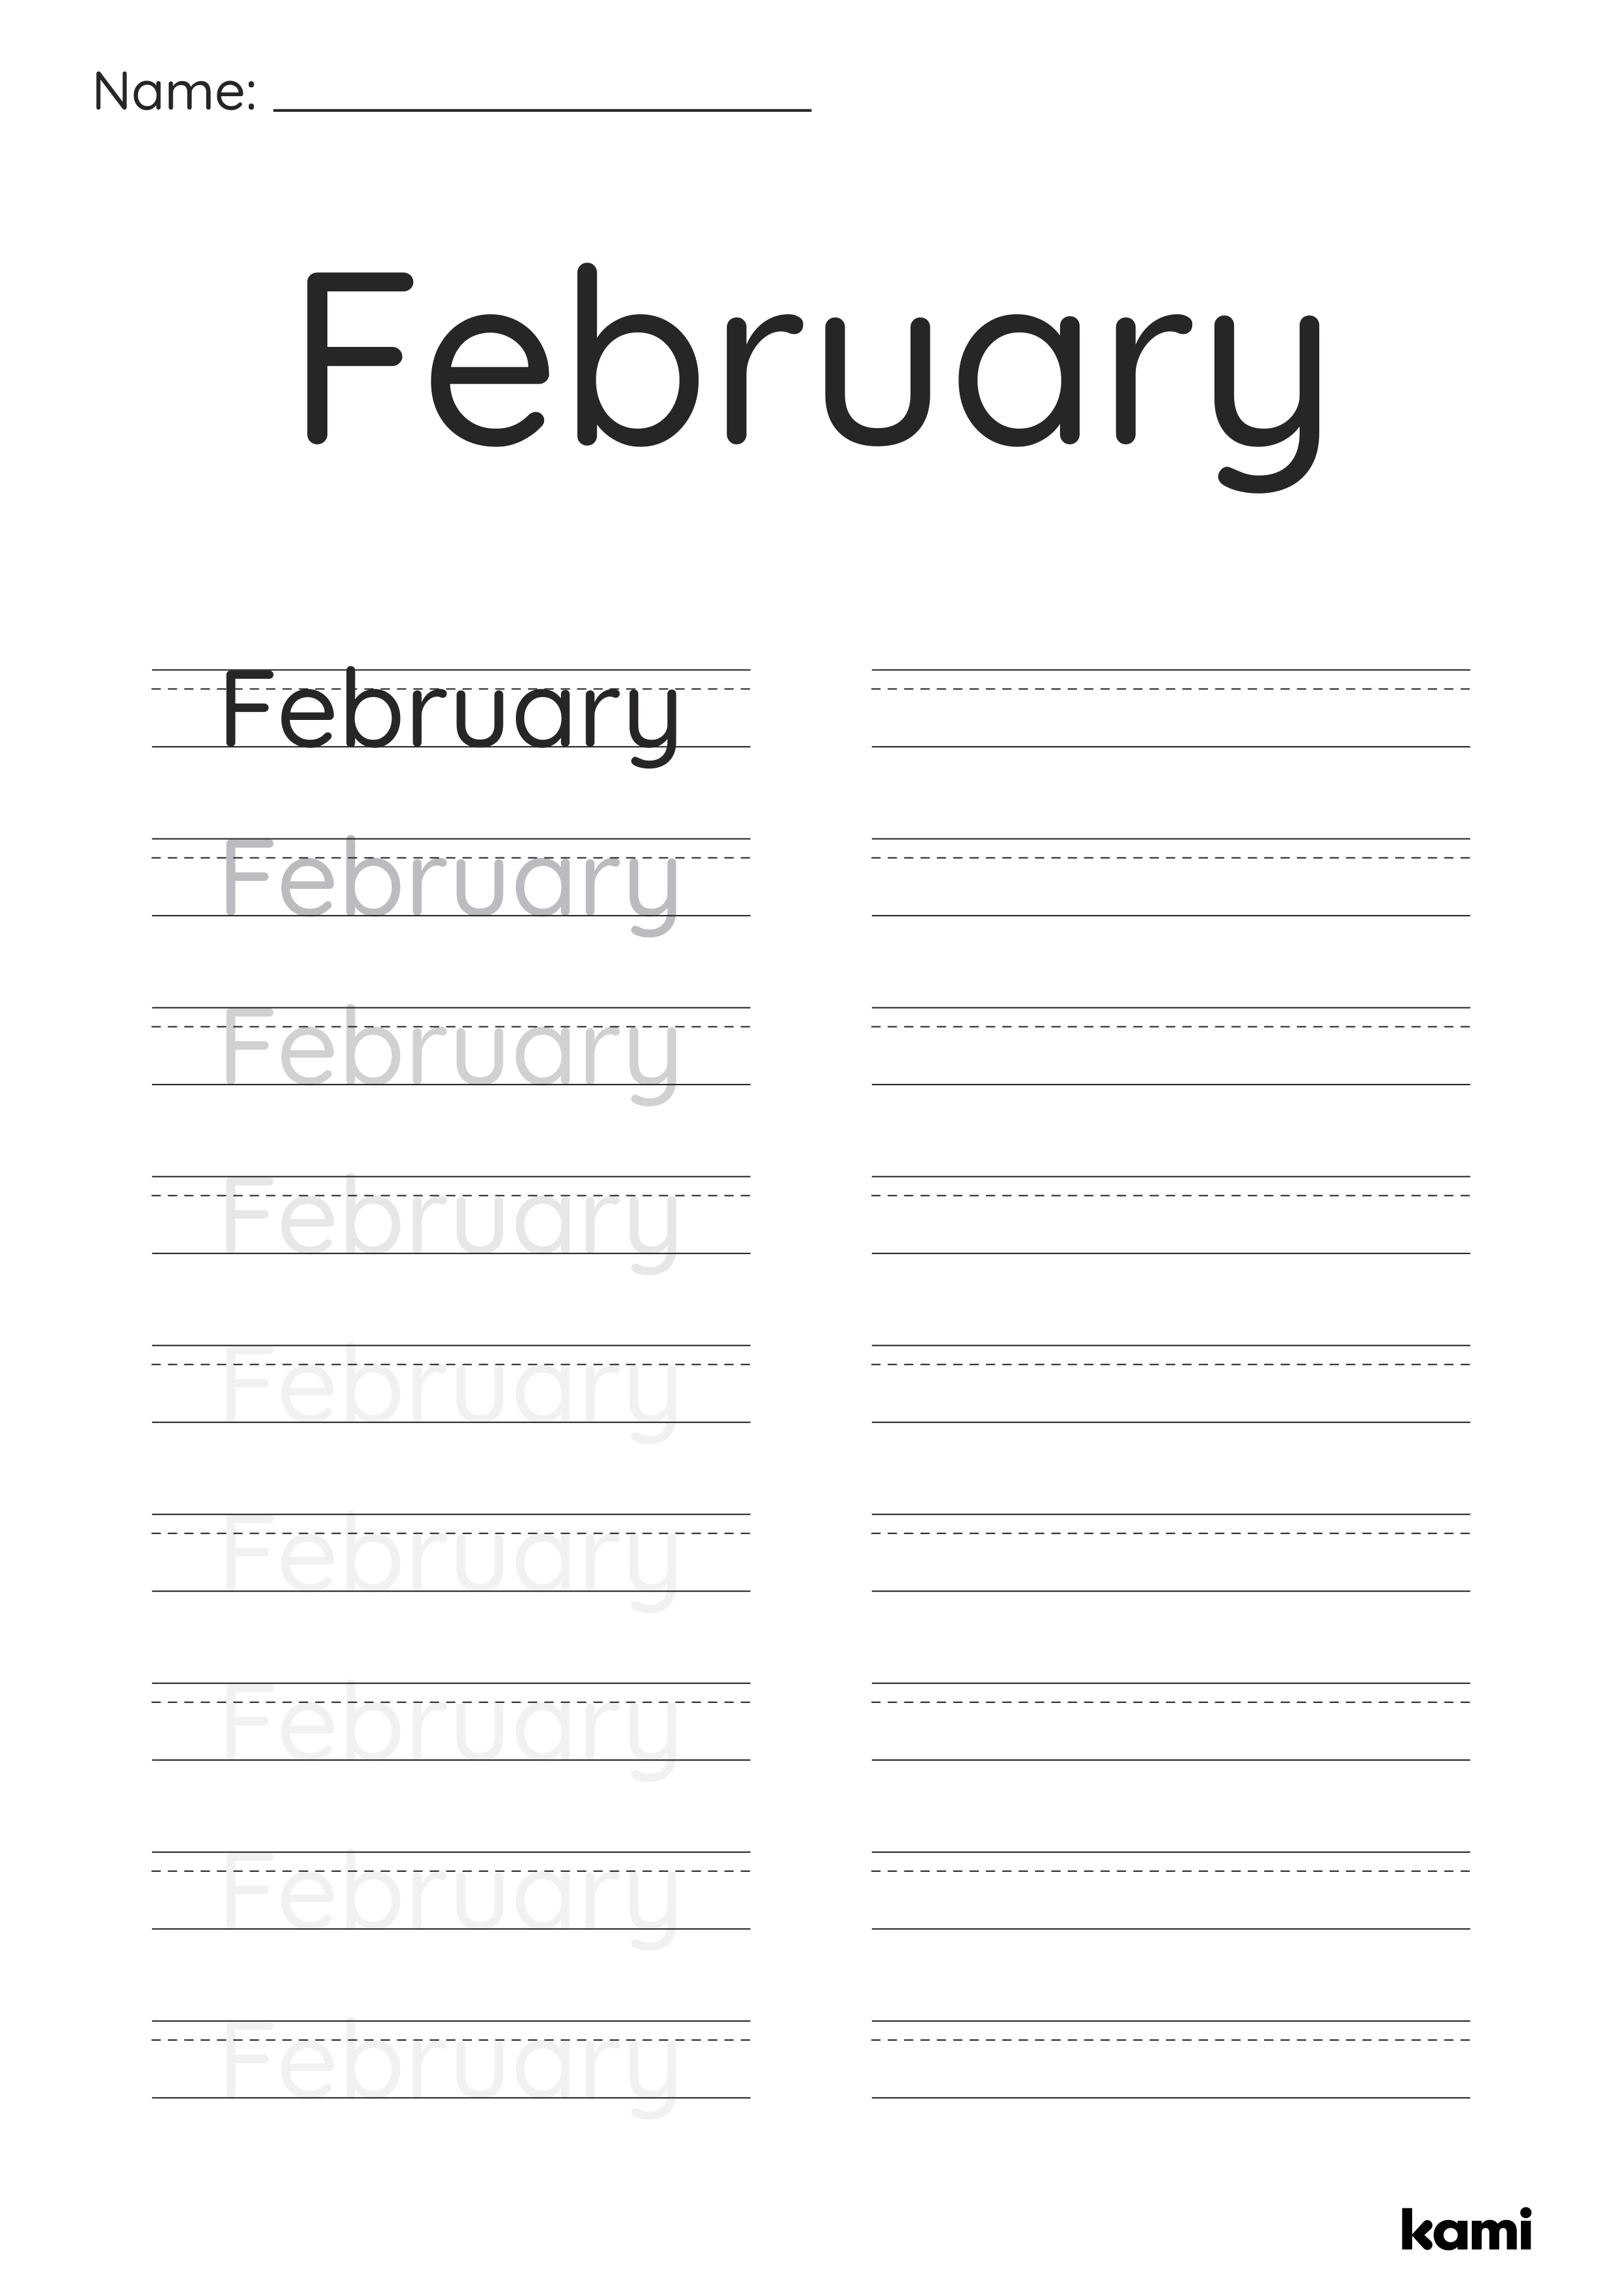 A handwriting columns worksheet for Pre-K - 1st graders with a months of the year theme